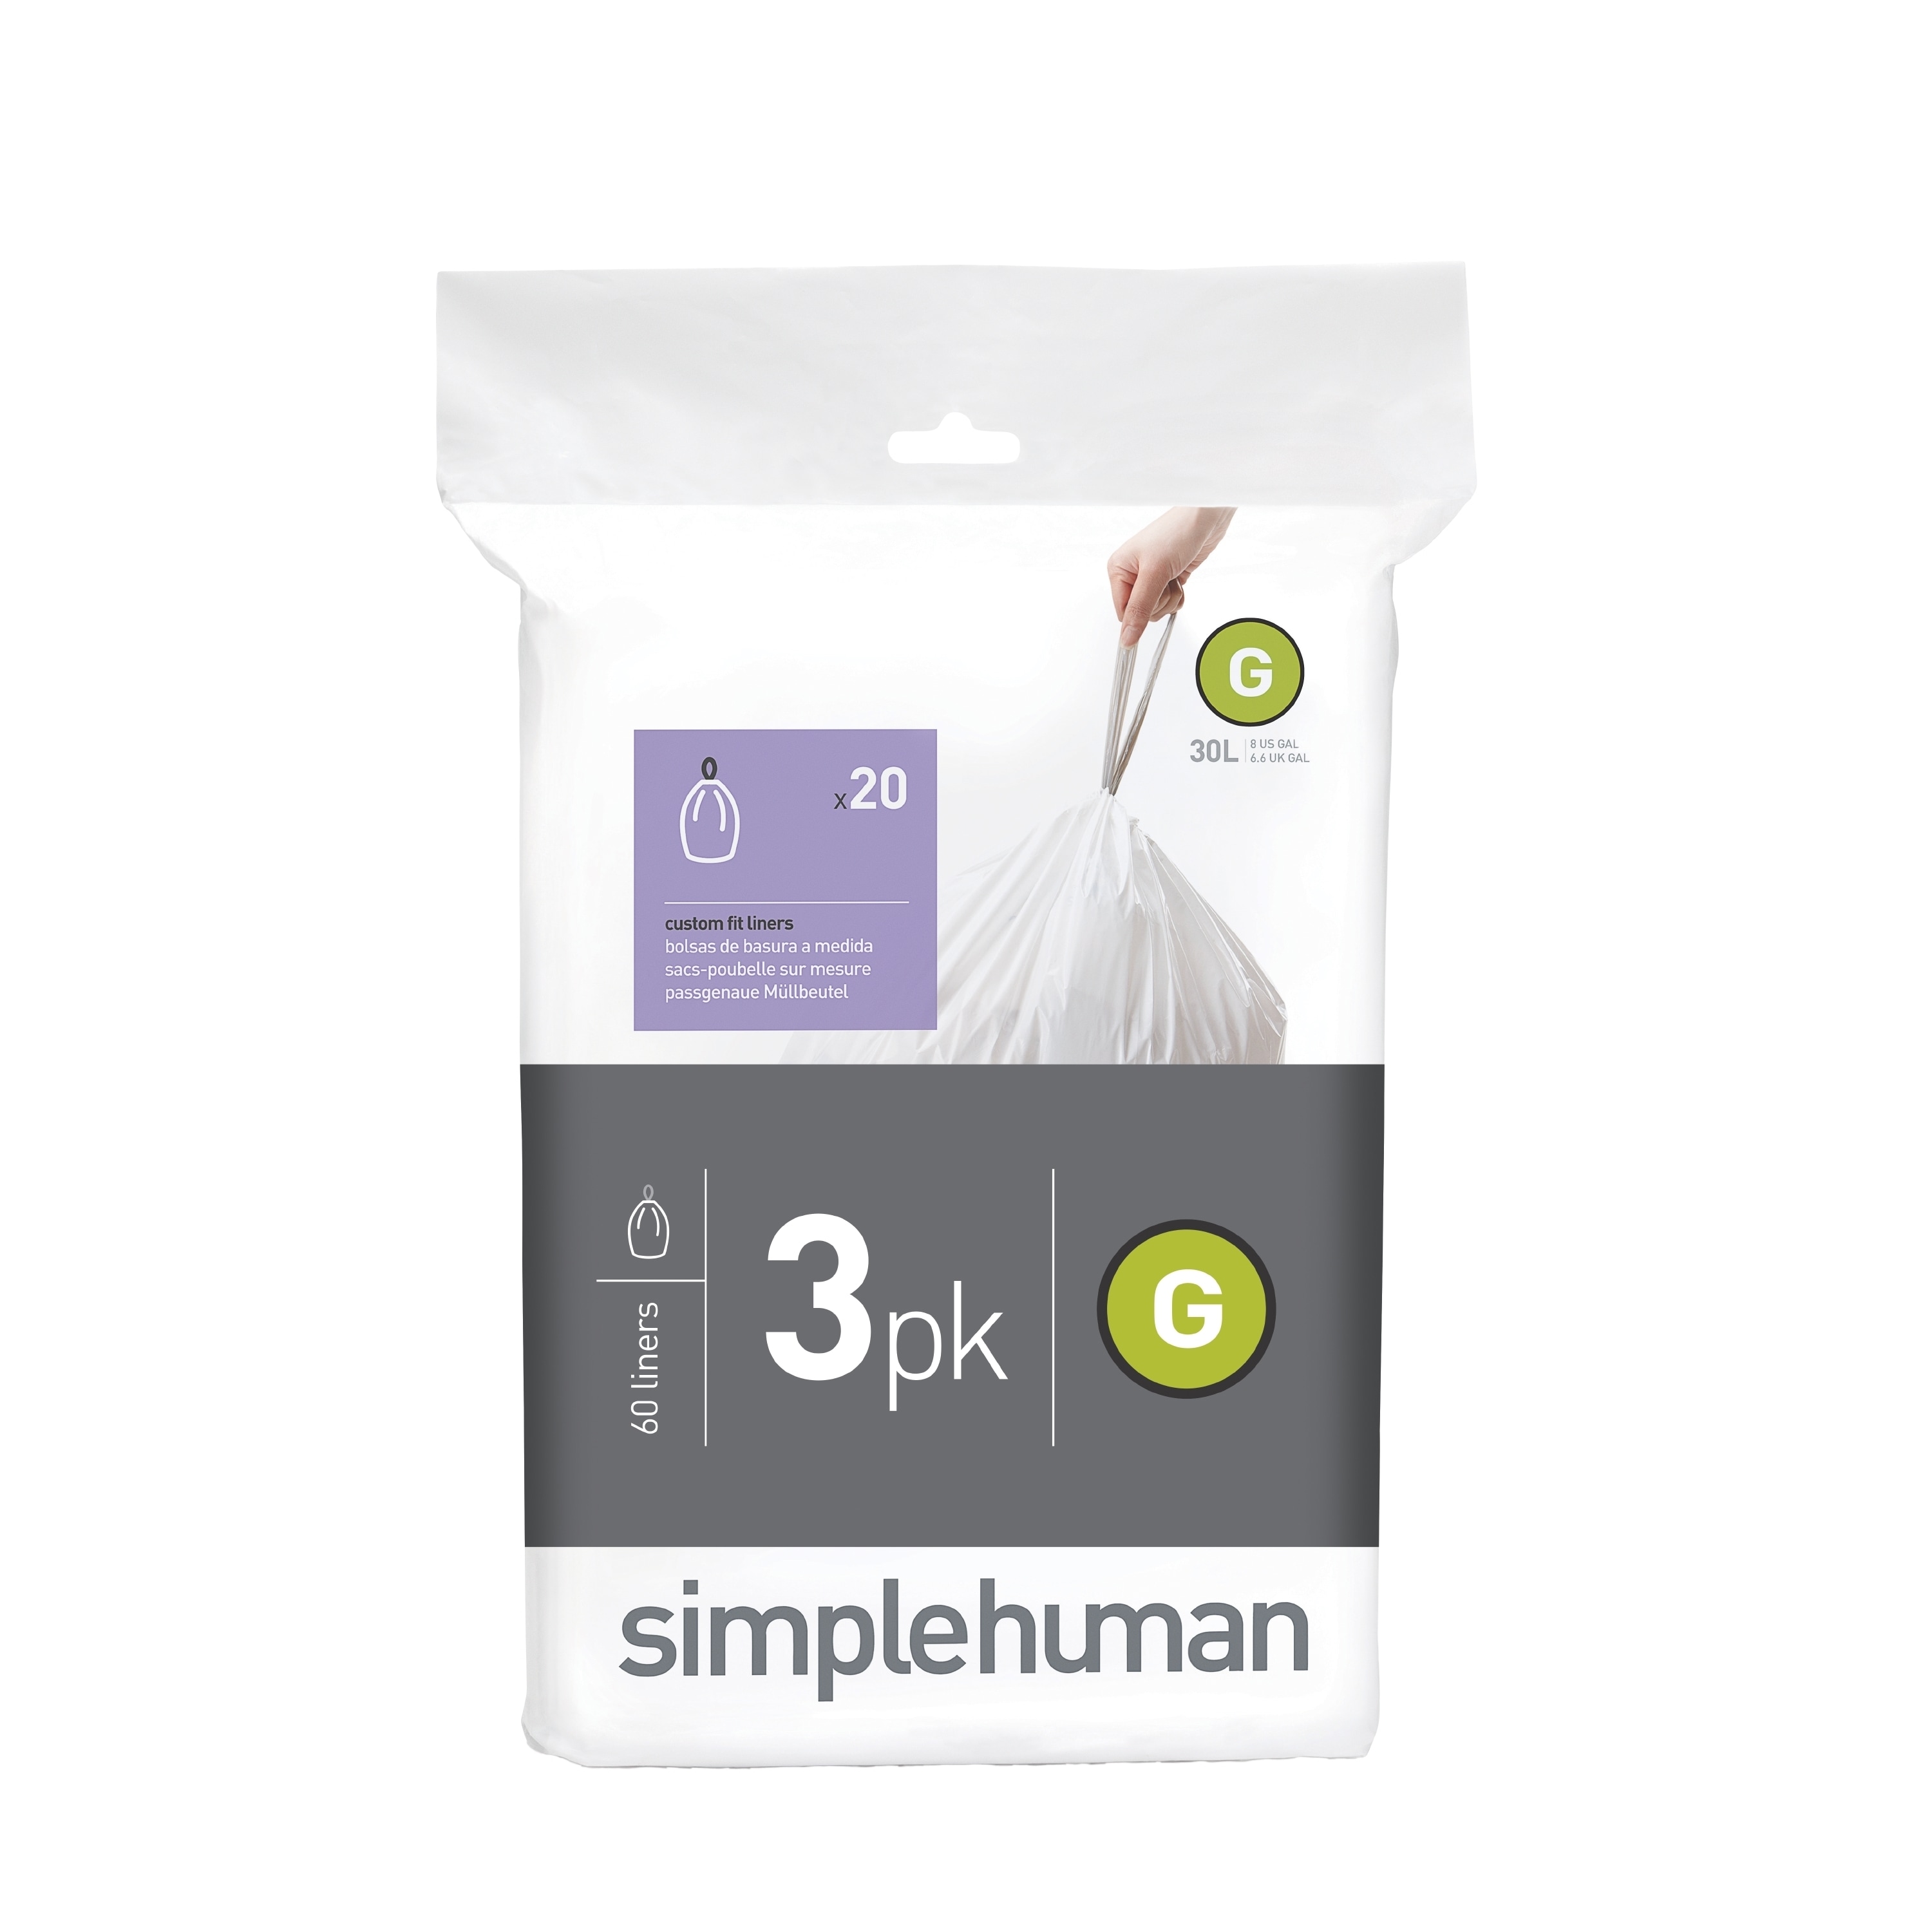 https://ak1.ostkcdn.com/images/products/10208068/Simplehuman-20-count-8-gallon-Code-G-Custom-Fit-Trash-Can-Liners-Pack-of-3-994f7e44-9863-496b-9d36-452496d4e199.jpg